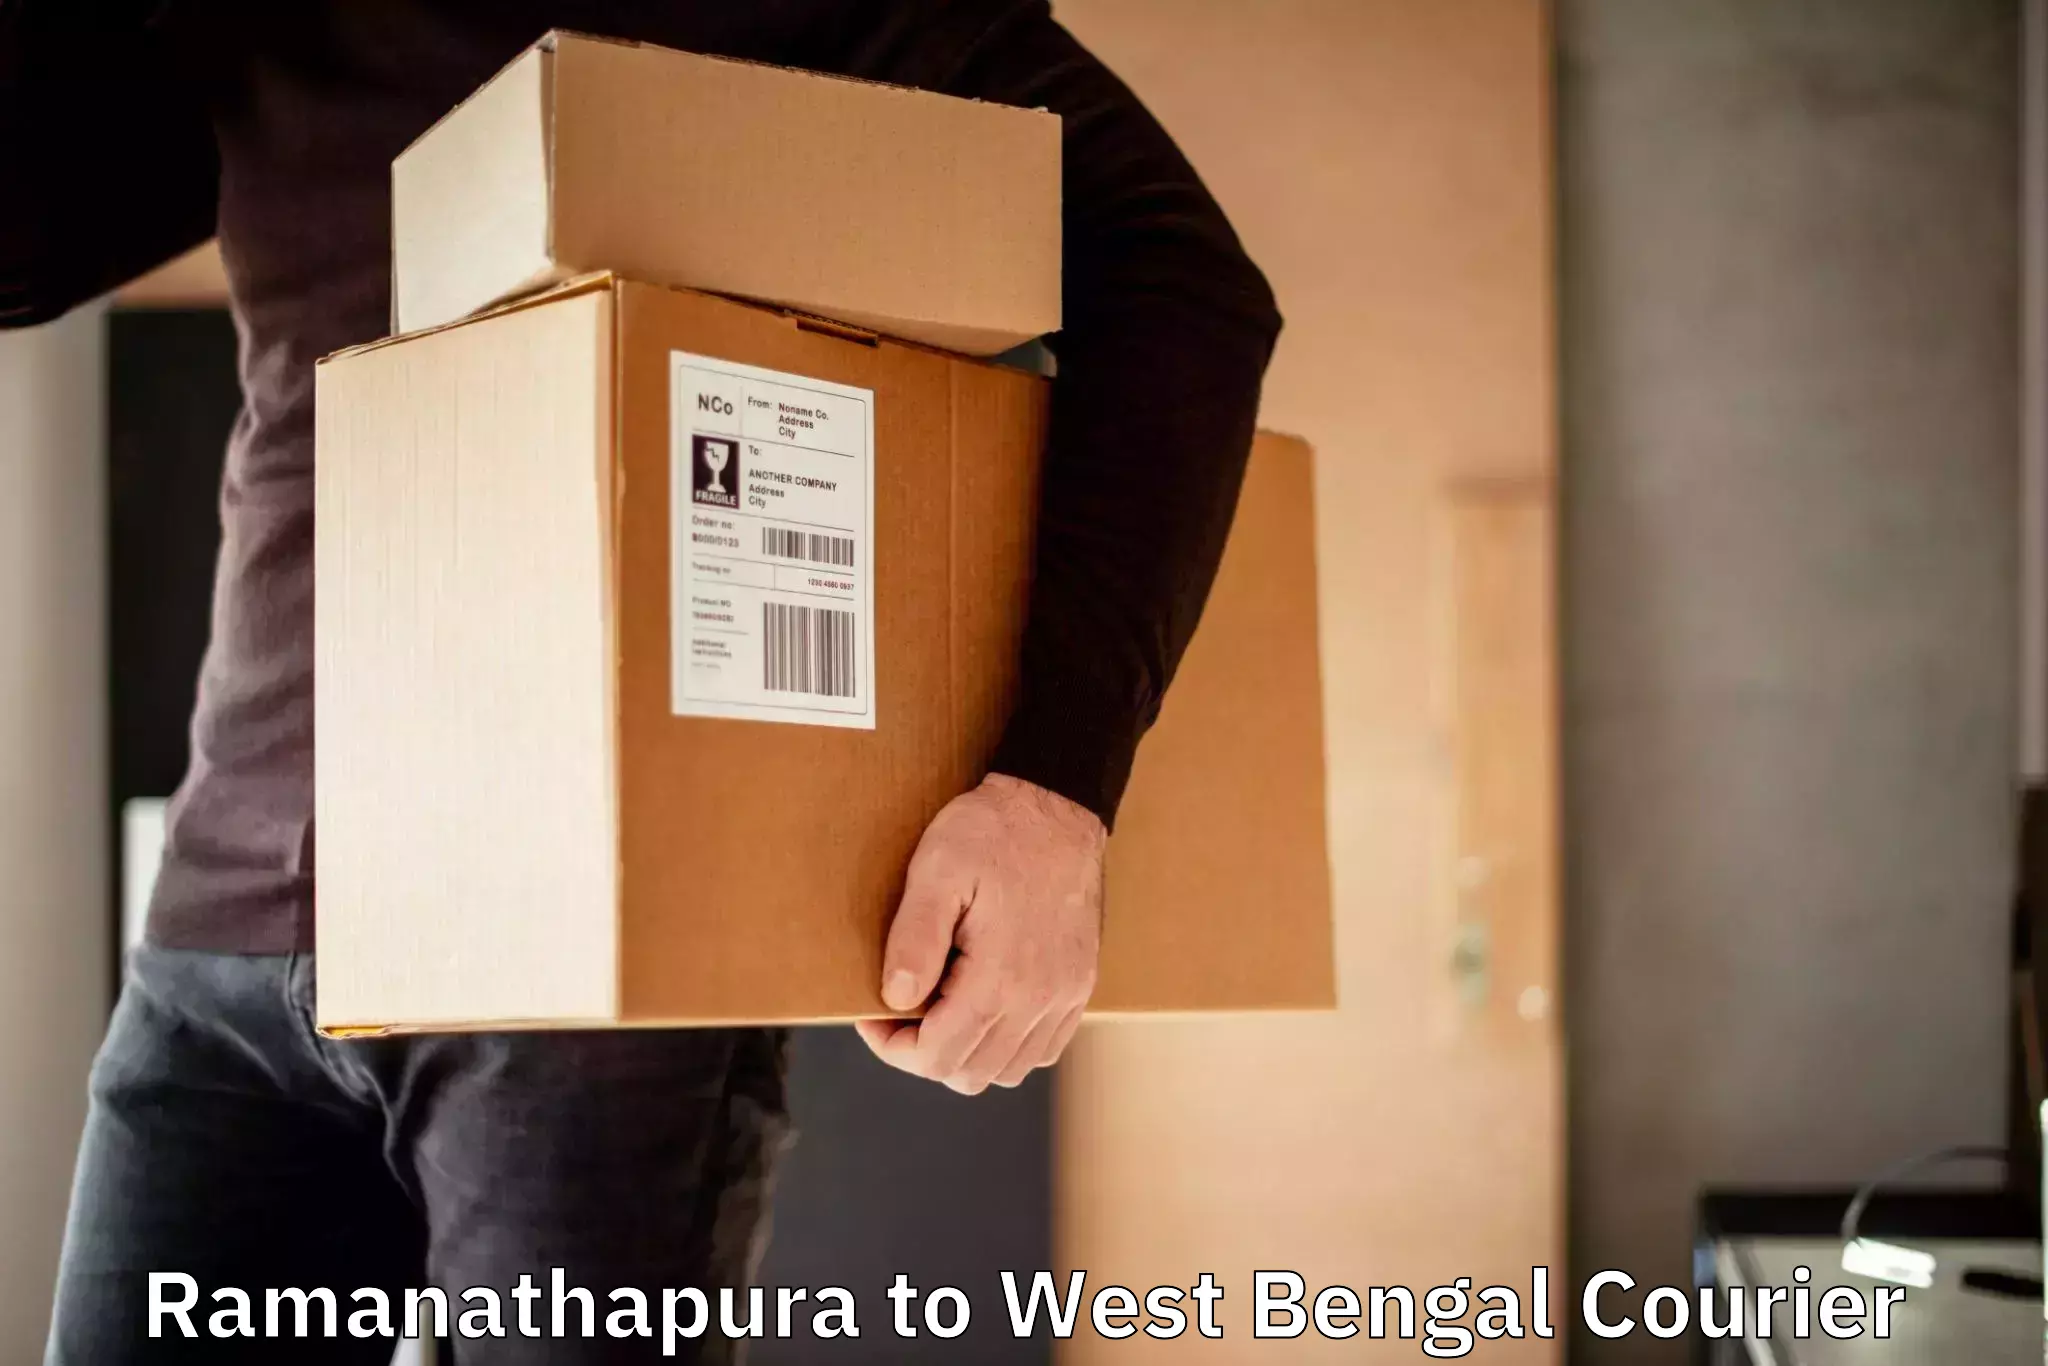 Courier service booking Ramanathapura to West Bengal